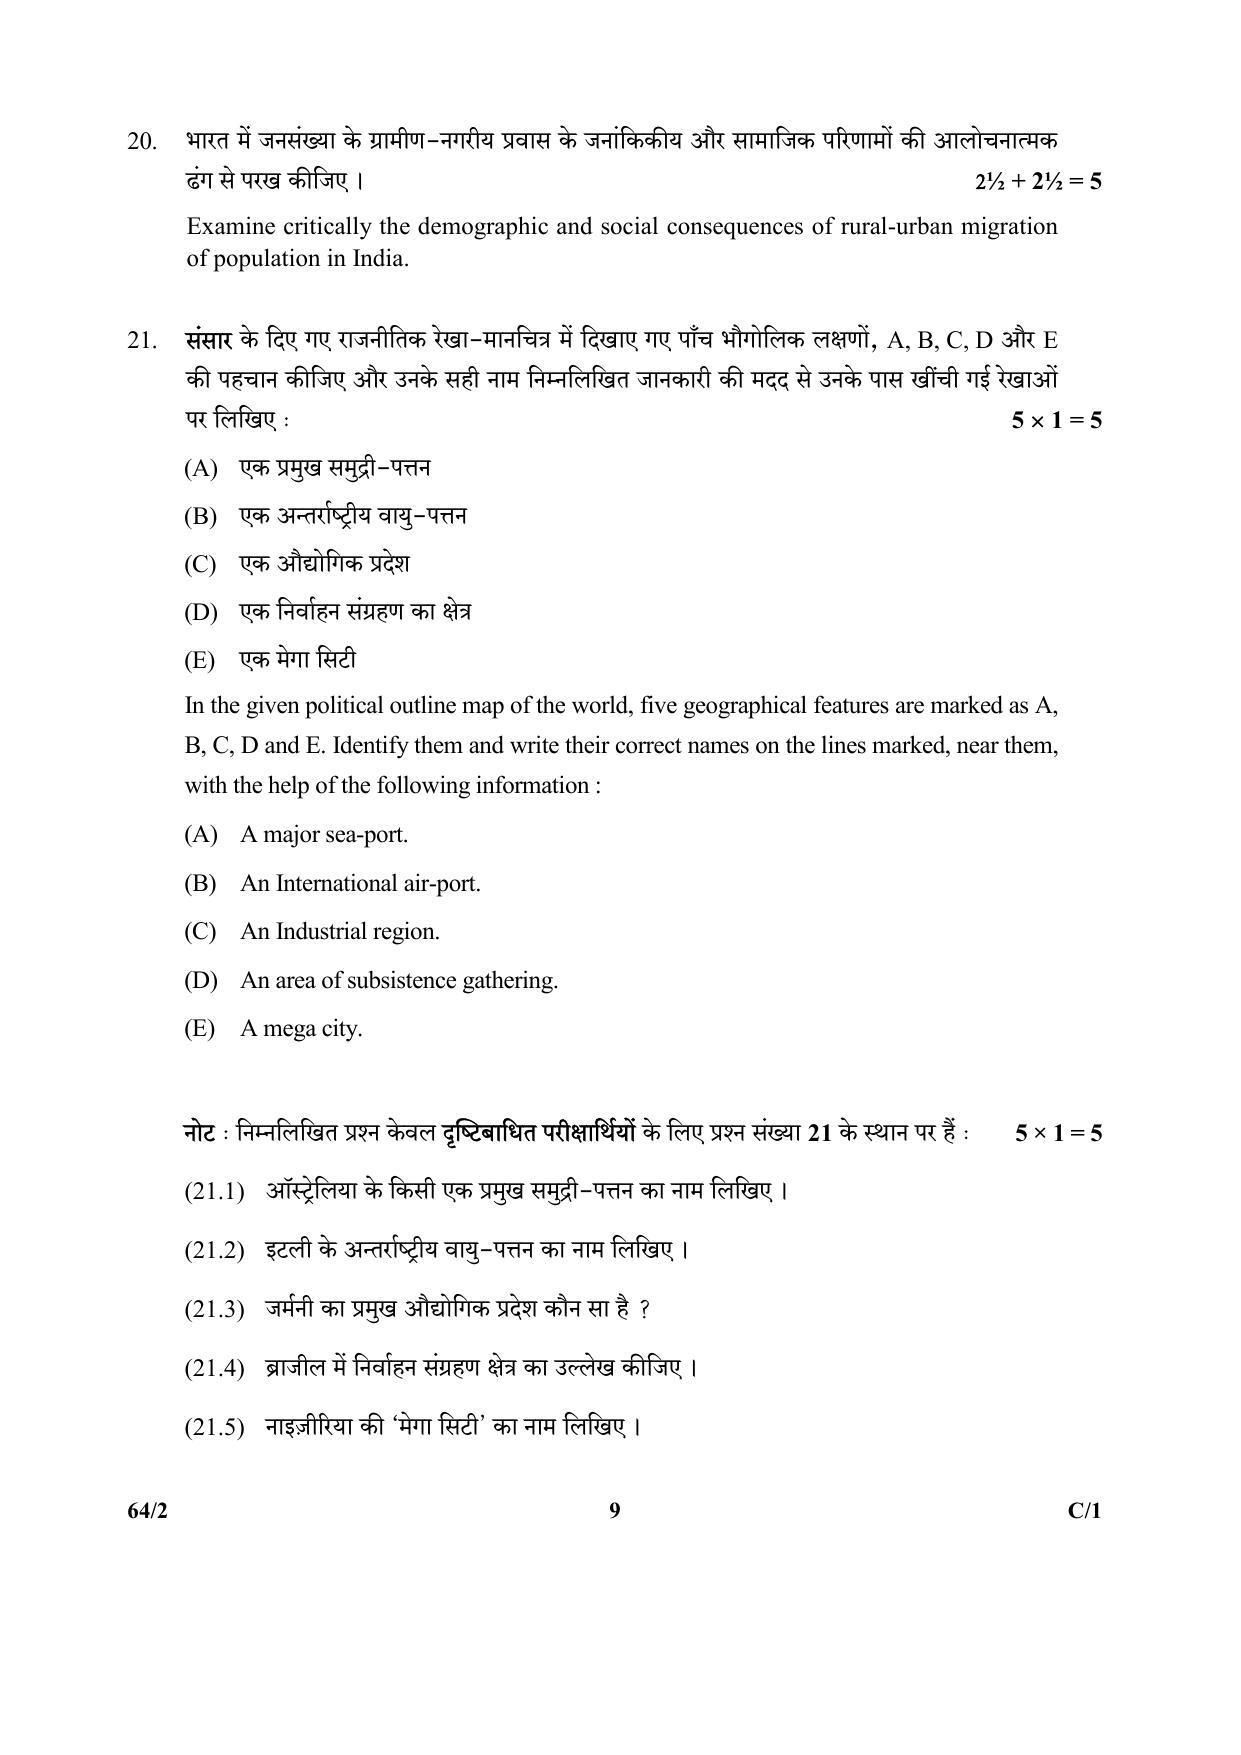 CBSE Class 12 64-2 (Geography) 2018 Compartment Question Paper - Page 9